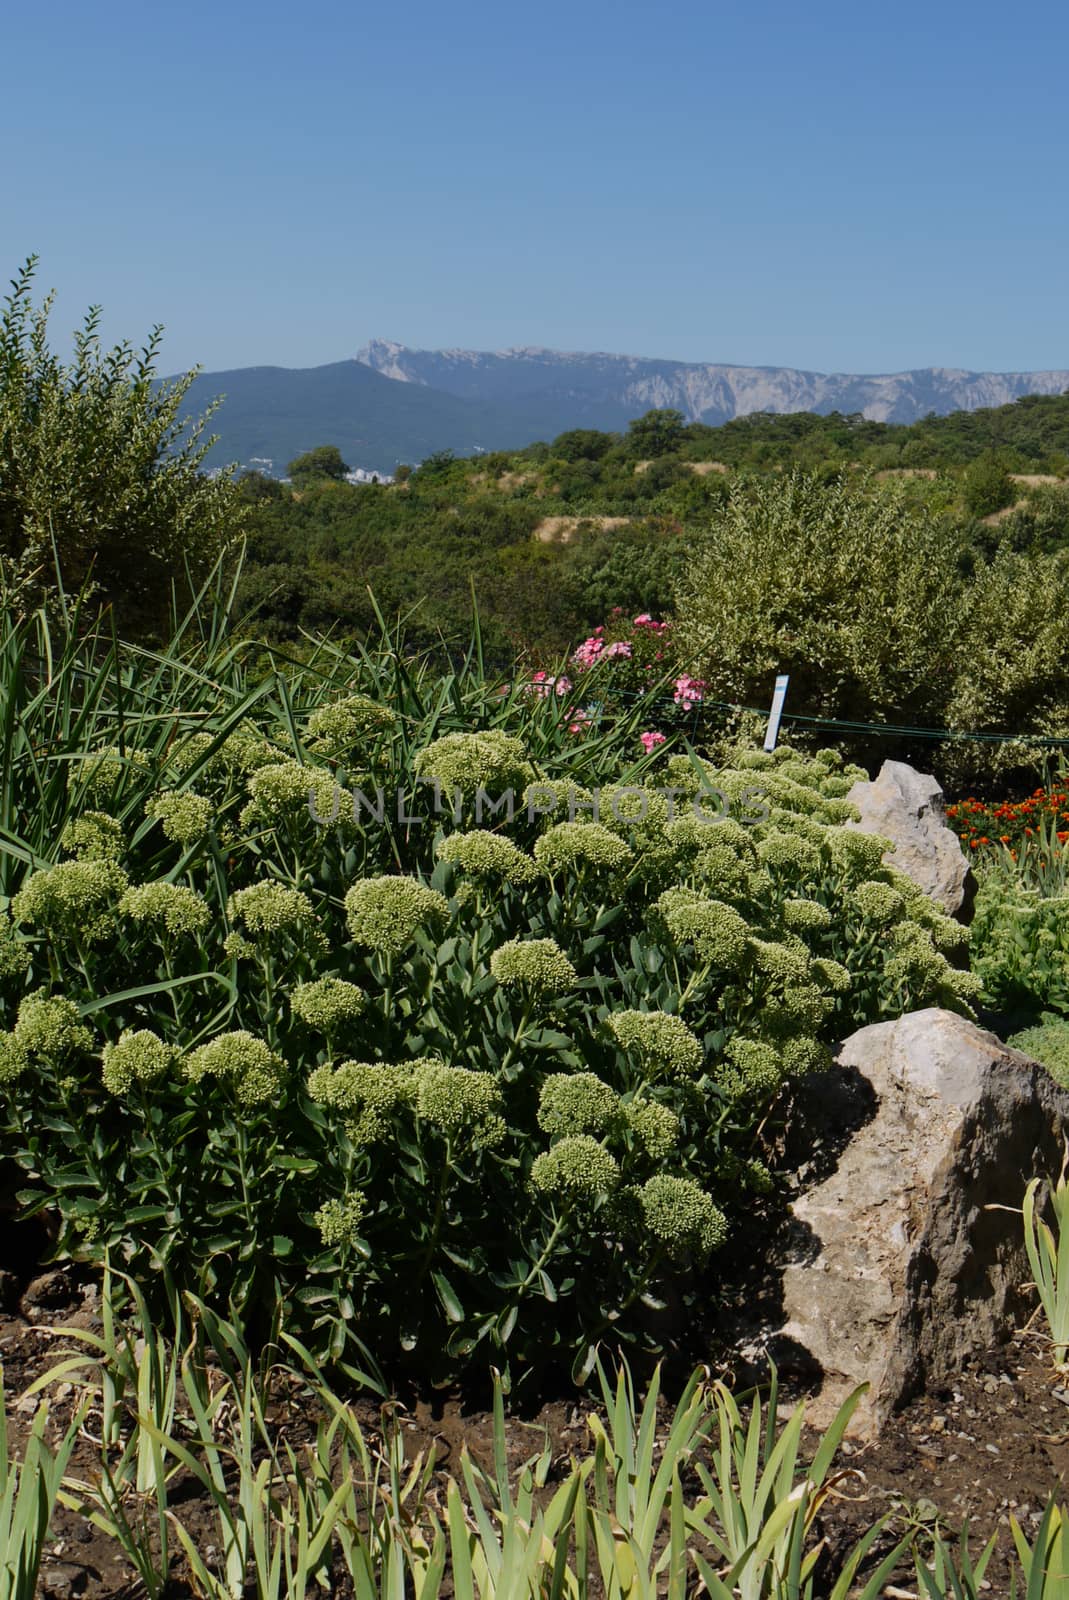 The stones lying in a flower bed next to green plants that have not yet begun to bloom. With a beautiful view of the horizon line with a line of mountain peaks propping the sky.